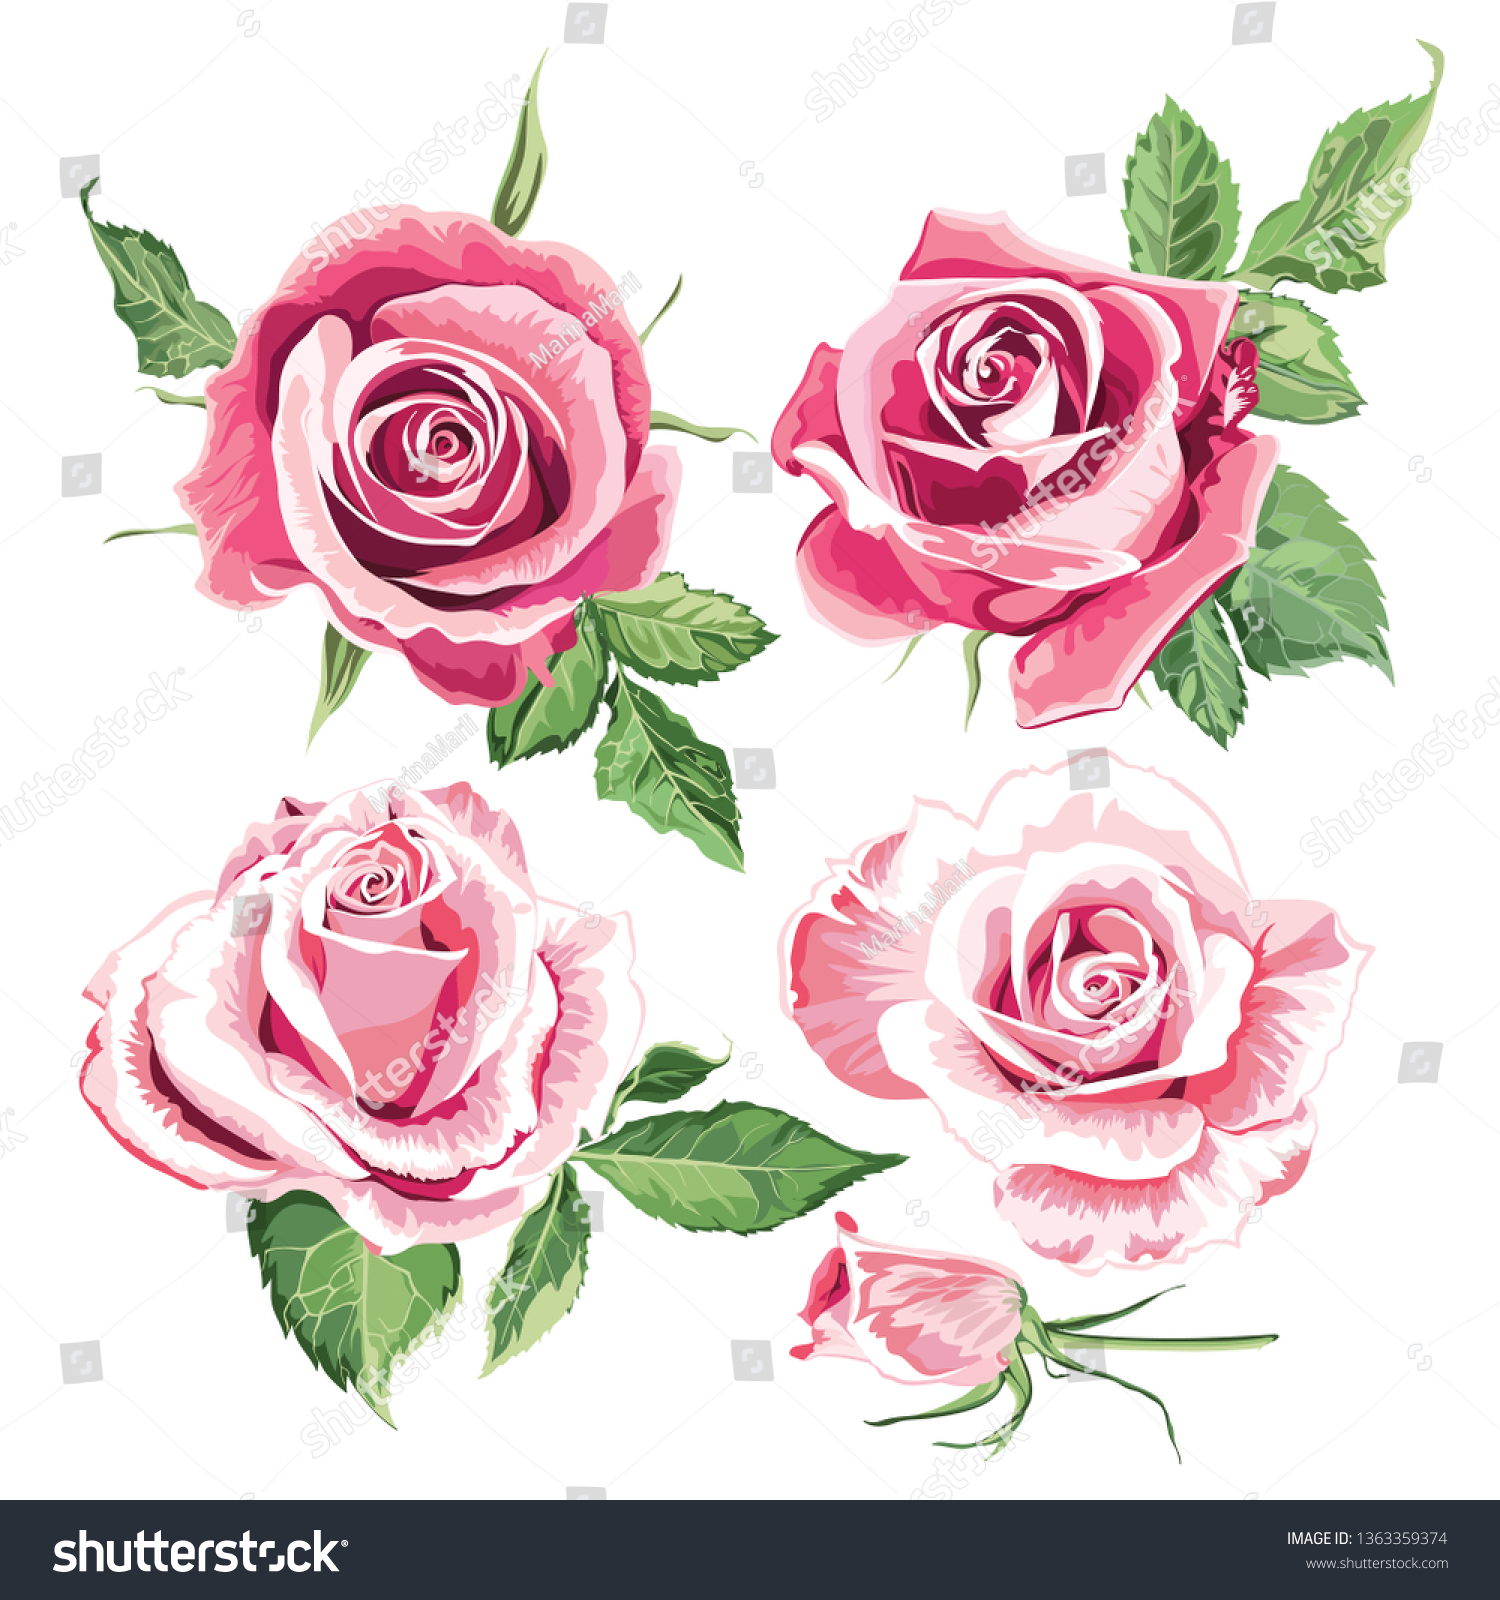 Pink Beautiful Roses Stock Vector (Royalty Free) 1363359374 | Shutterstock